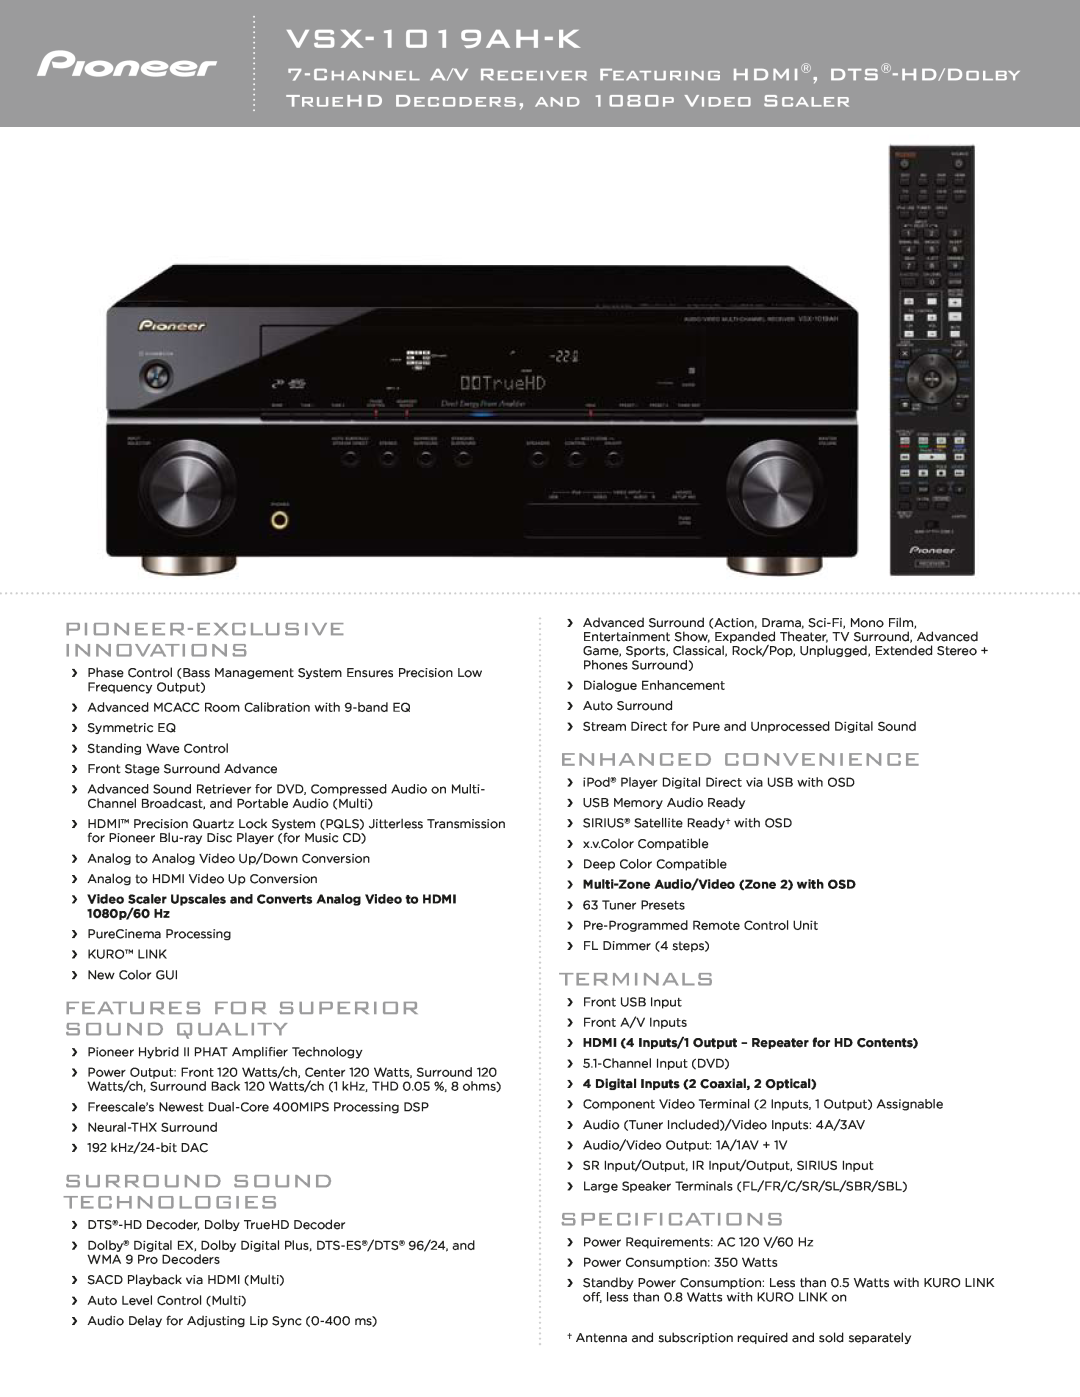 Pioneer VSX-1019AHK specifications VSX-1019AH-K, Pioneer-Exclusive Innovations, Features For Superior Sound Quality 